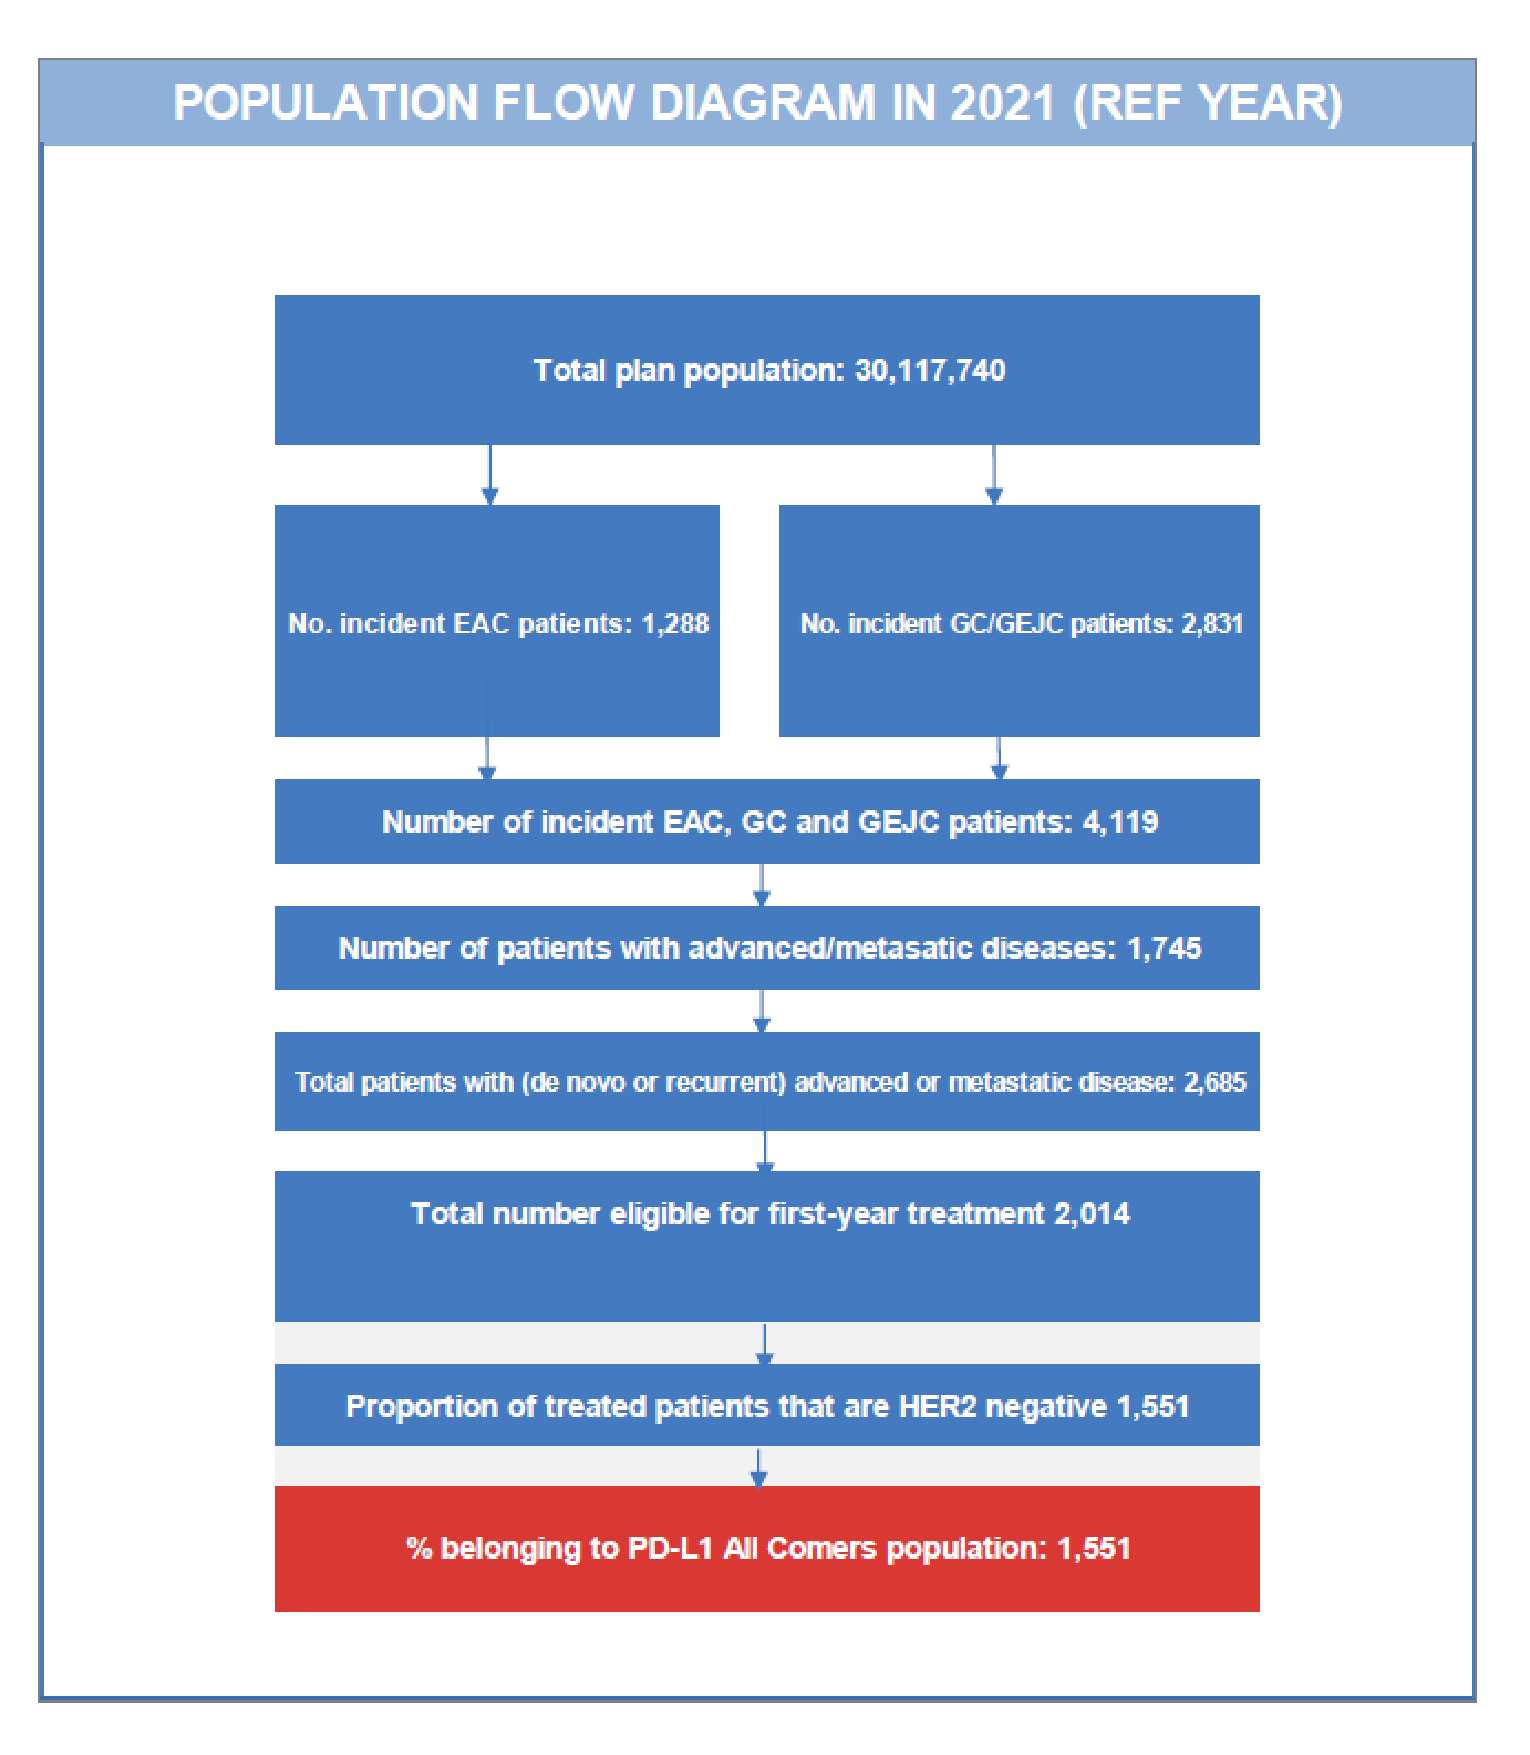 A flow chart describing the method used to estimate the eligible patient population, starting with the total plan population of 30,117,740 and decreasing through each eligibility criterion until the final population estimate of 1,551.